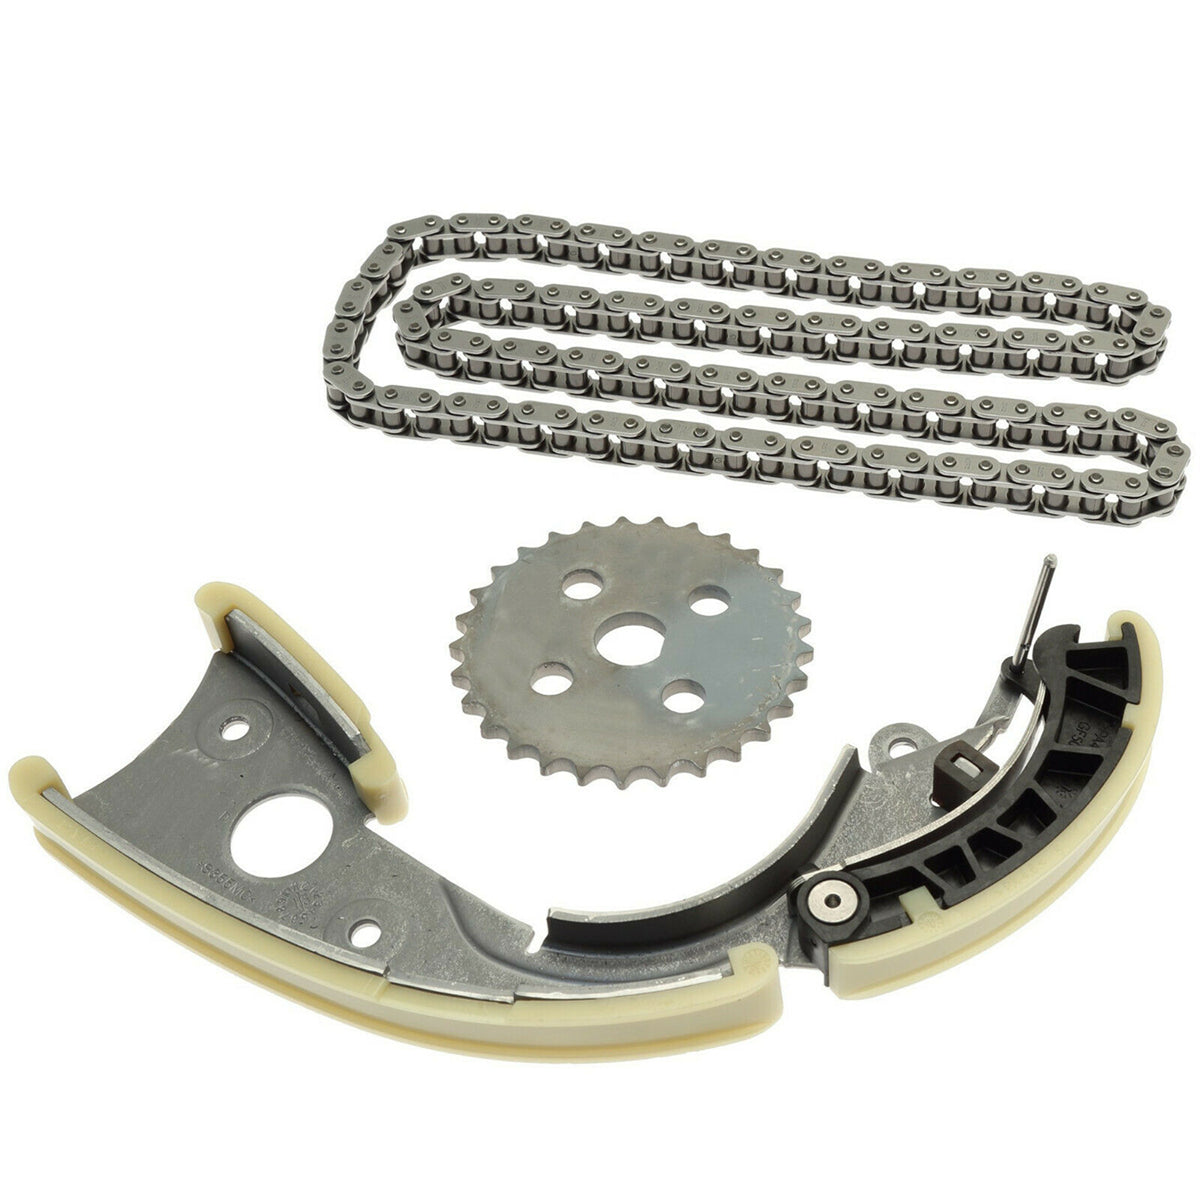 Timing Chain Kit 06E109465AS, Timing Chain Kit for 2012-2016 Audi, Daysyore Timing Chain Kit, Car Timing Chain Kit